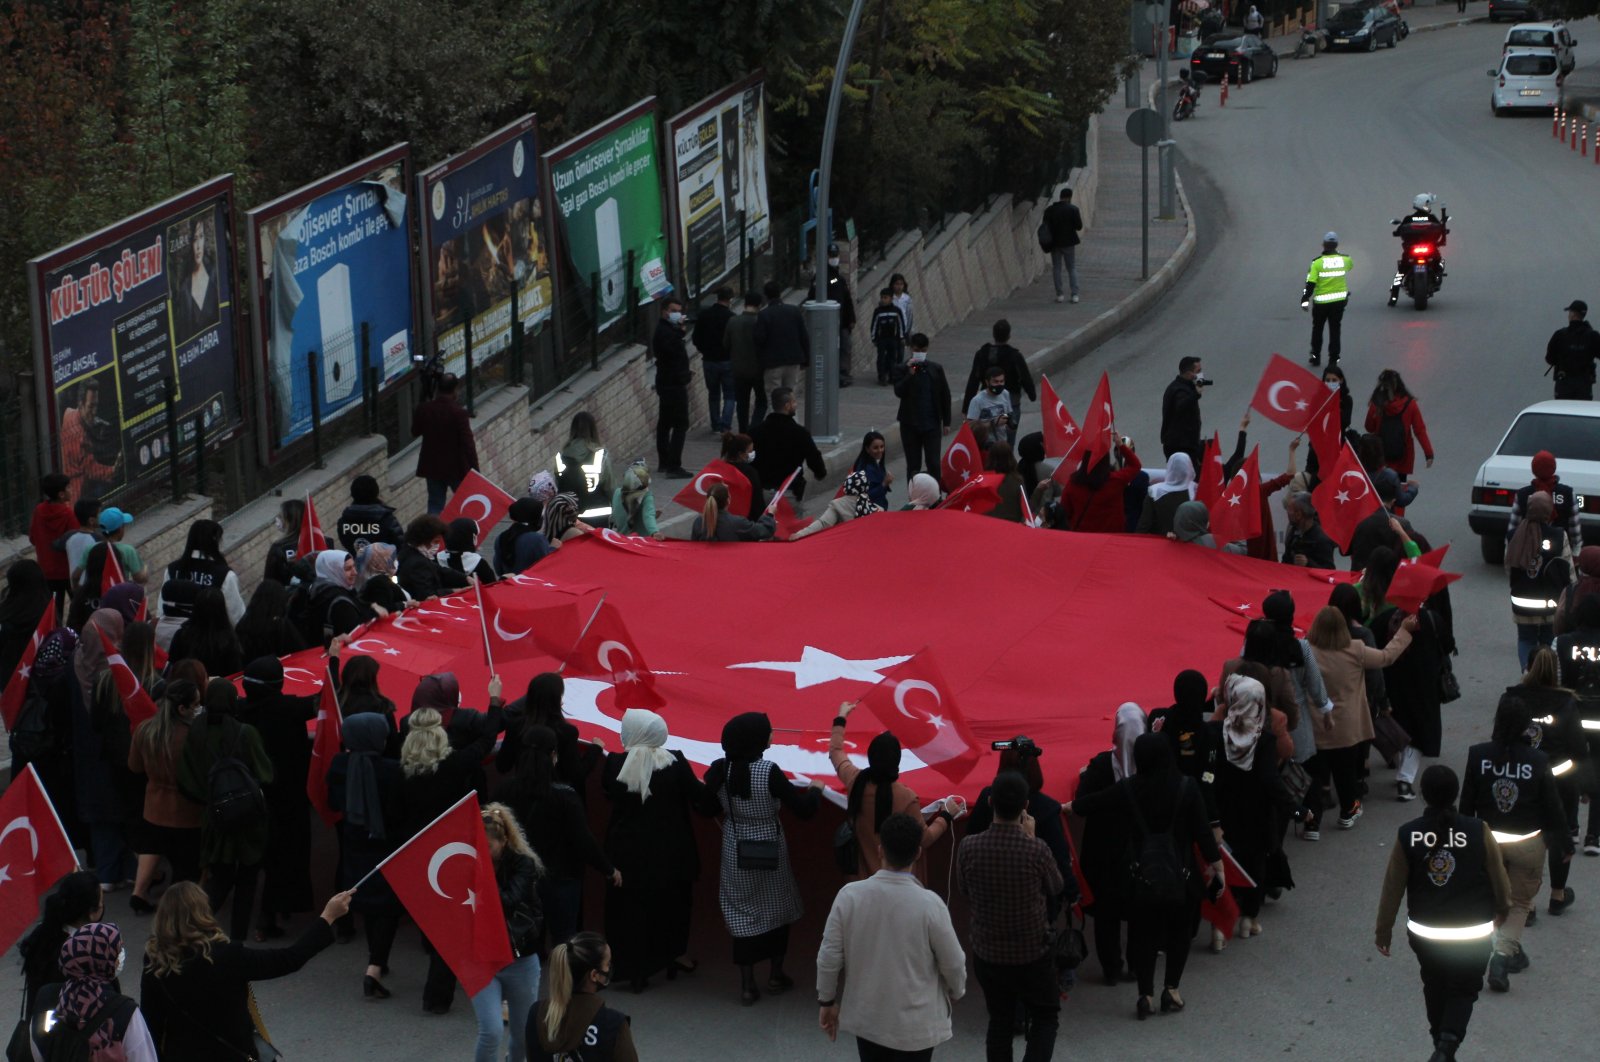 Women from 81 provinces staged a protest against the PKK in Şırnak province, Turkey, Oct. 28, 2021. (IHA Photo)